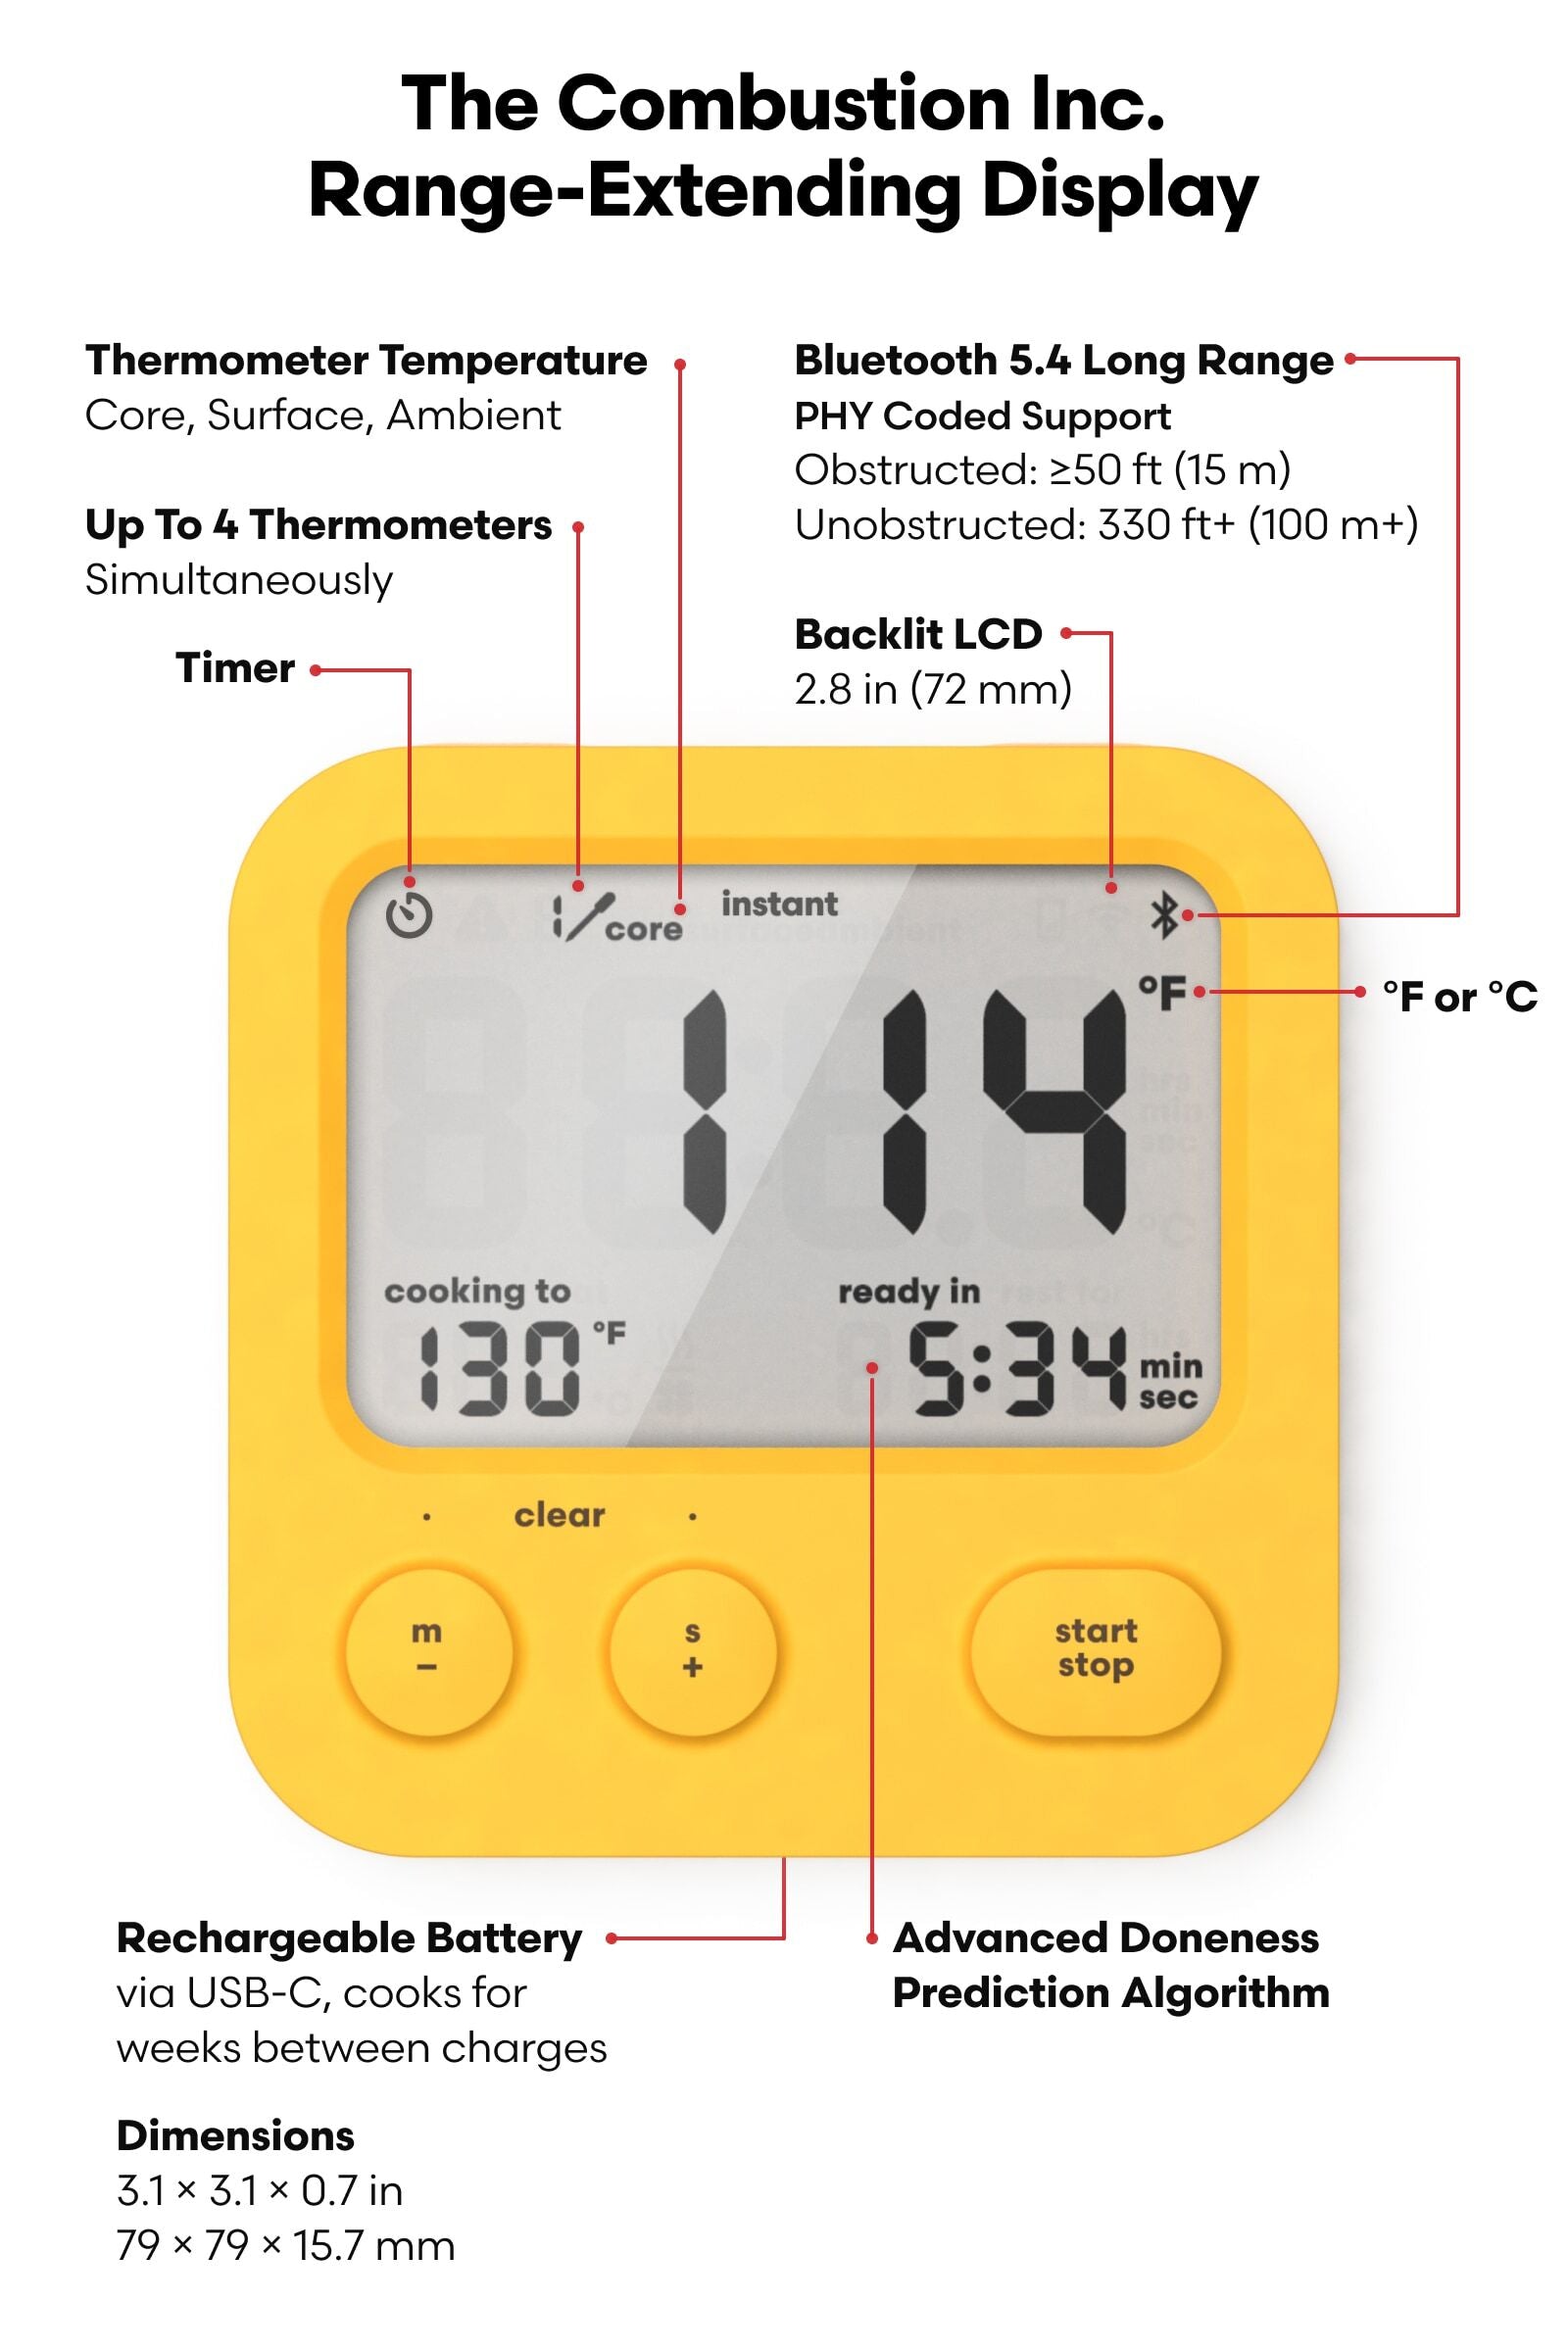 Thermometer temperature: core, surface, ambient; up to 4 thermometers simultaneously; timer; bluetooth 5.4 long range: PHY coded support, obstructed: ≥50 feet, unobstructed: 330 feet+; backlit LCD: 2.8 in; USB-C rechargeable battery, cooks for weeks between charges; dimensions: 3.1 × 3.1 × 0.7 in; advanced doneness prediction algorithm